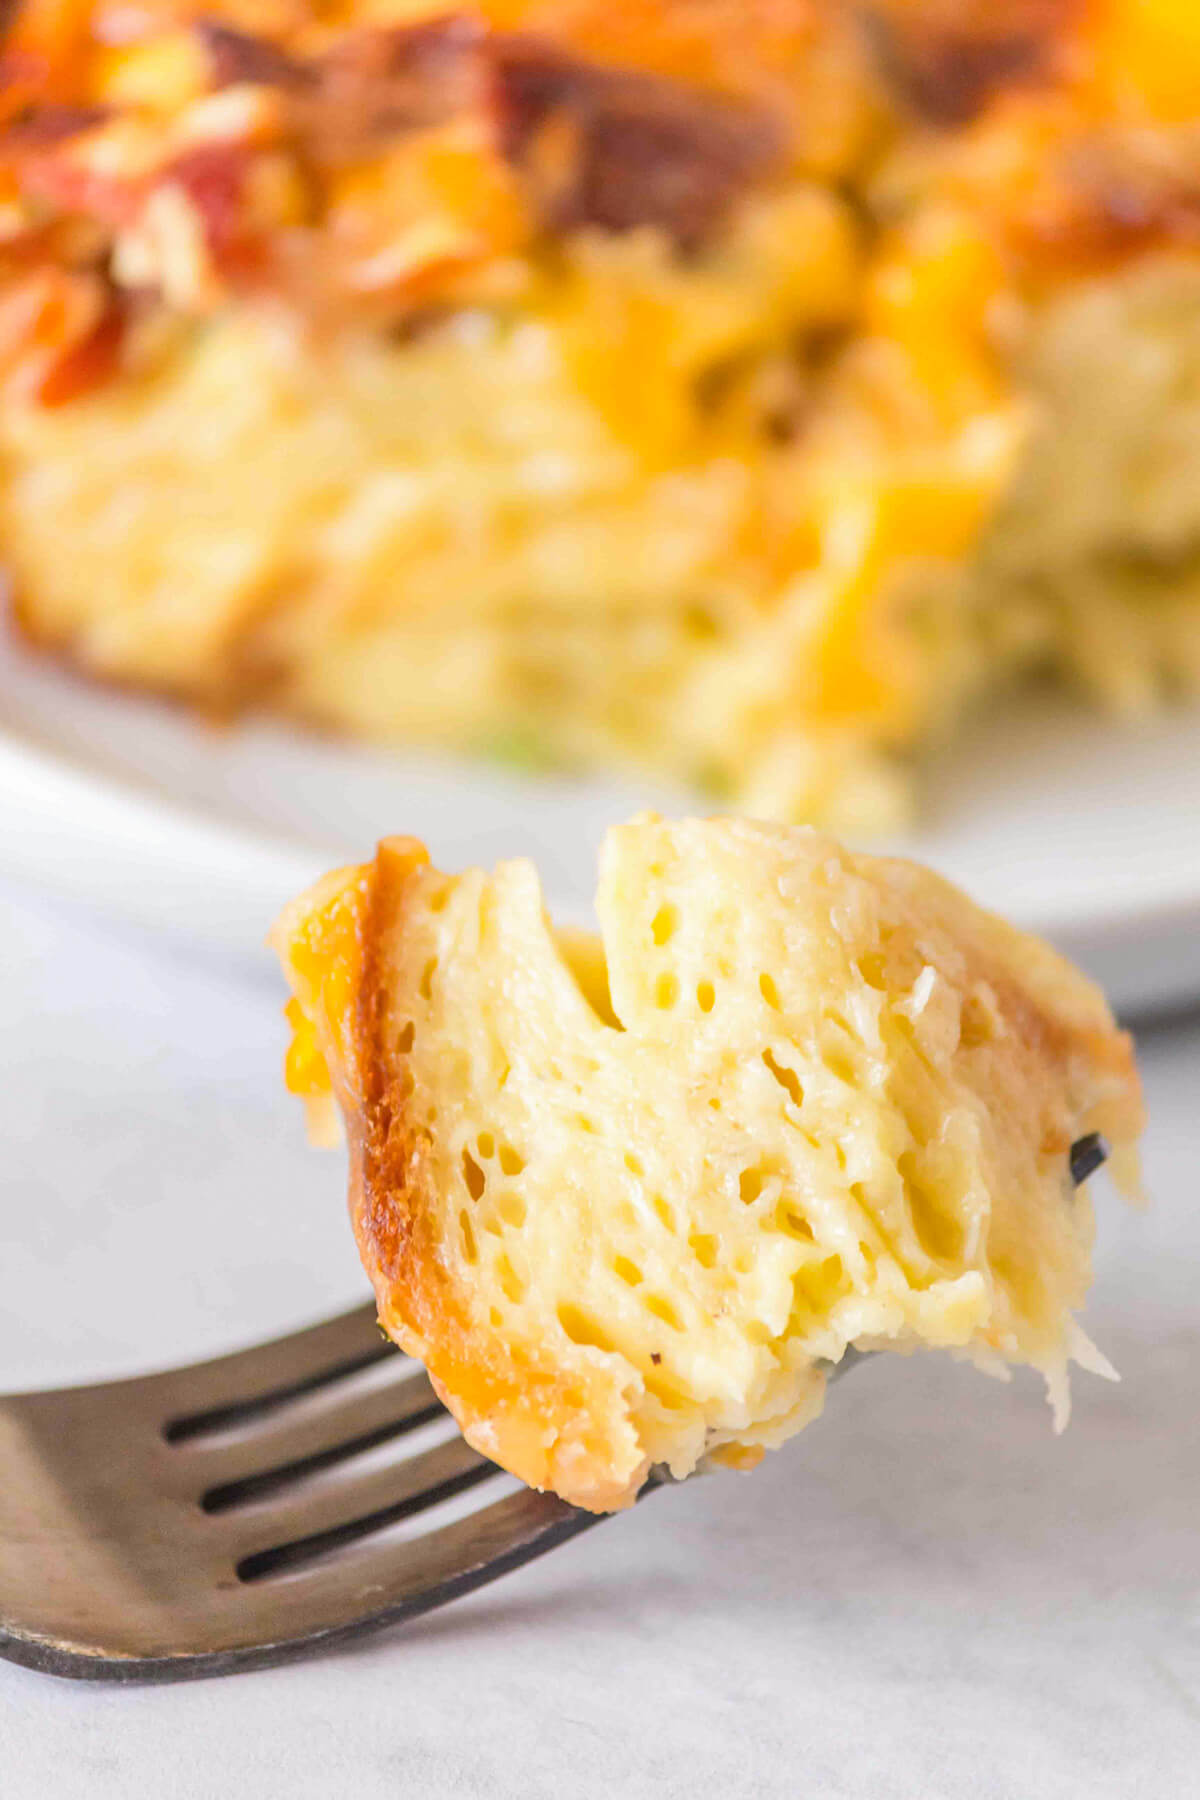 A fork holds a piece of egg coated croissant showing the light and airy casserole texture.